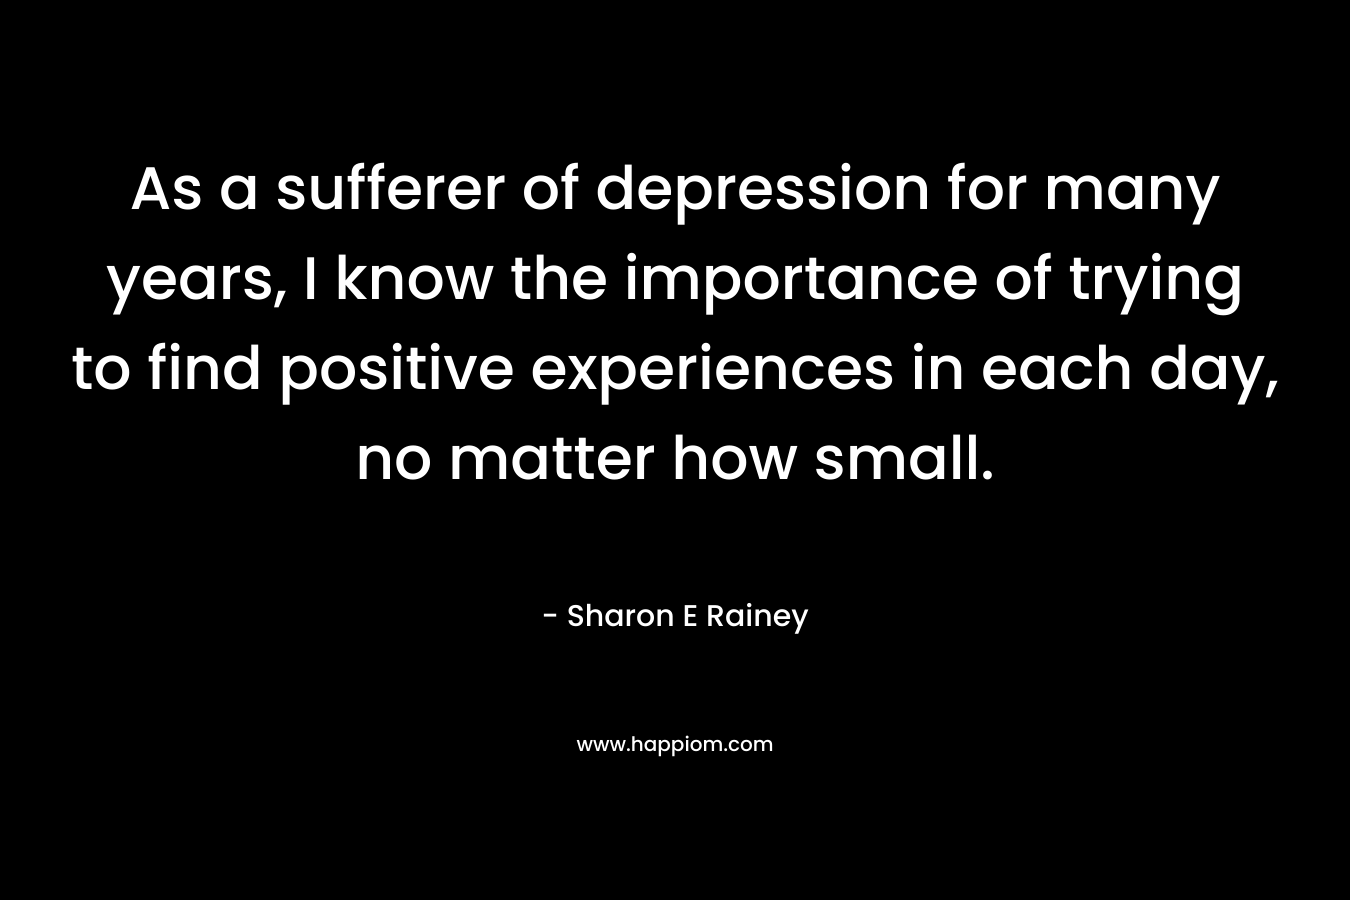 As a sufferer of depression for many years, I know the importance of trying to find positive experiences in each day, no matter how small. – Sharon E Rainey